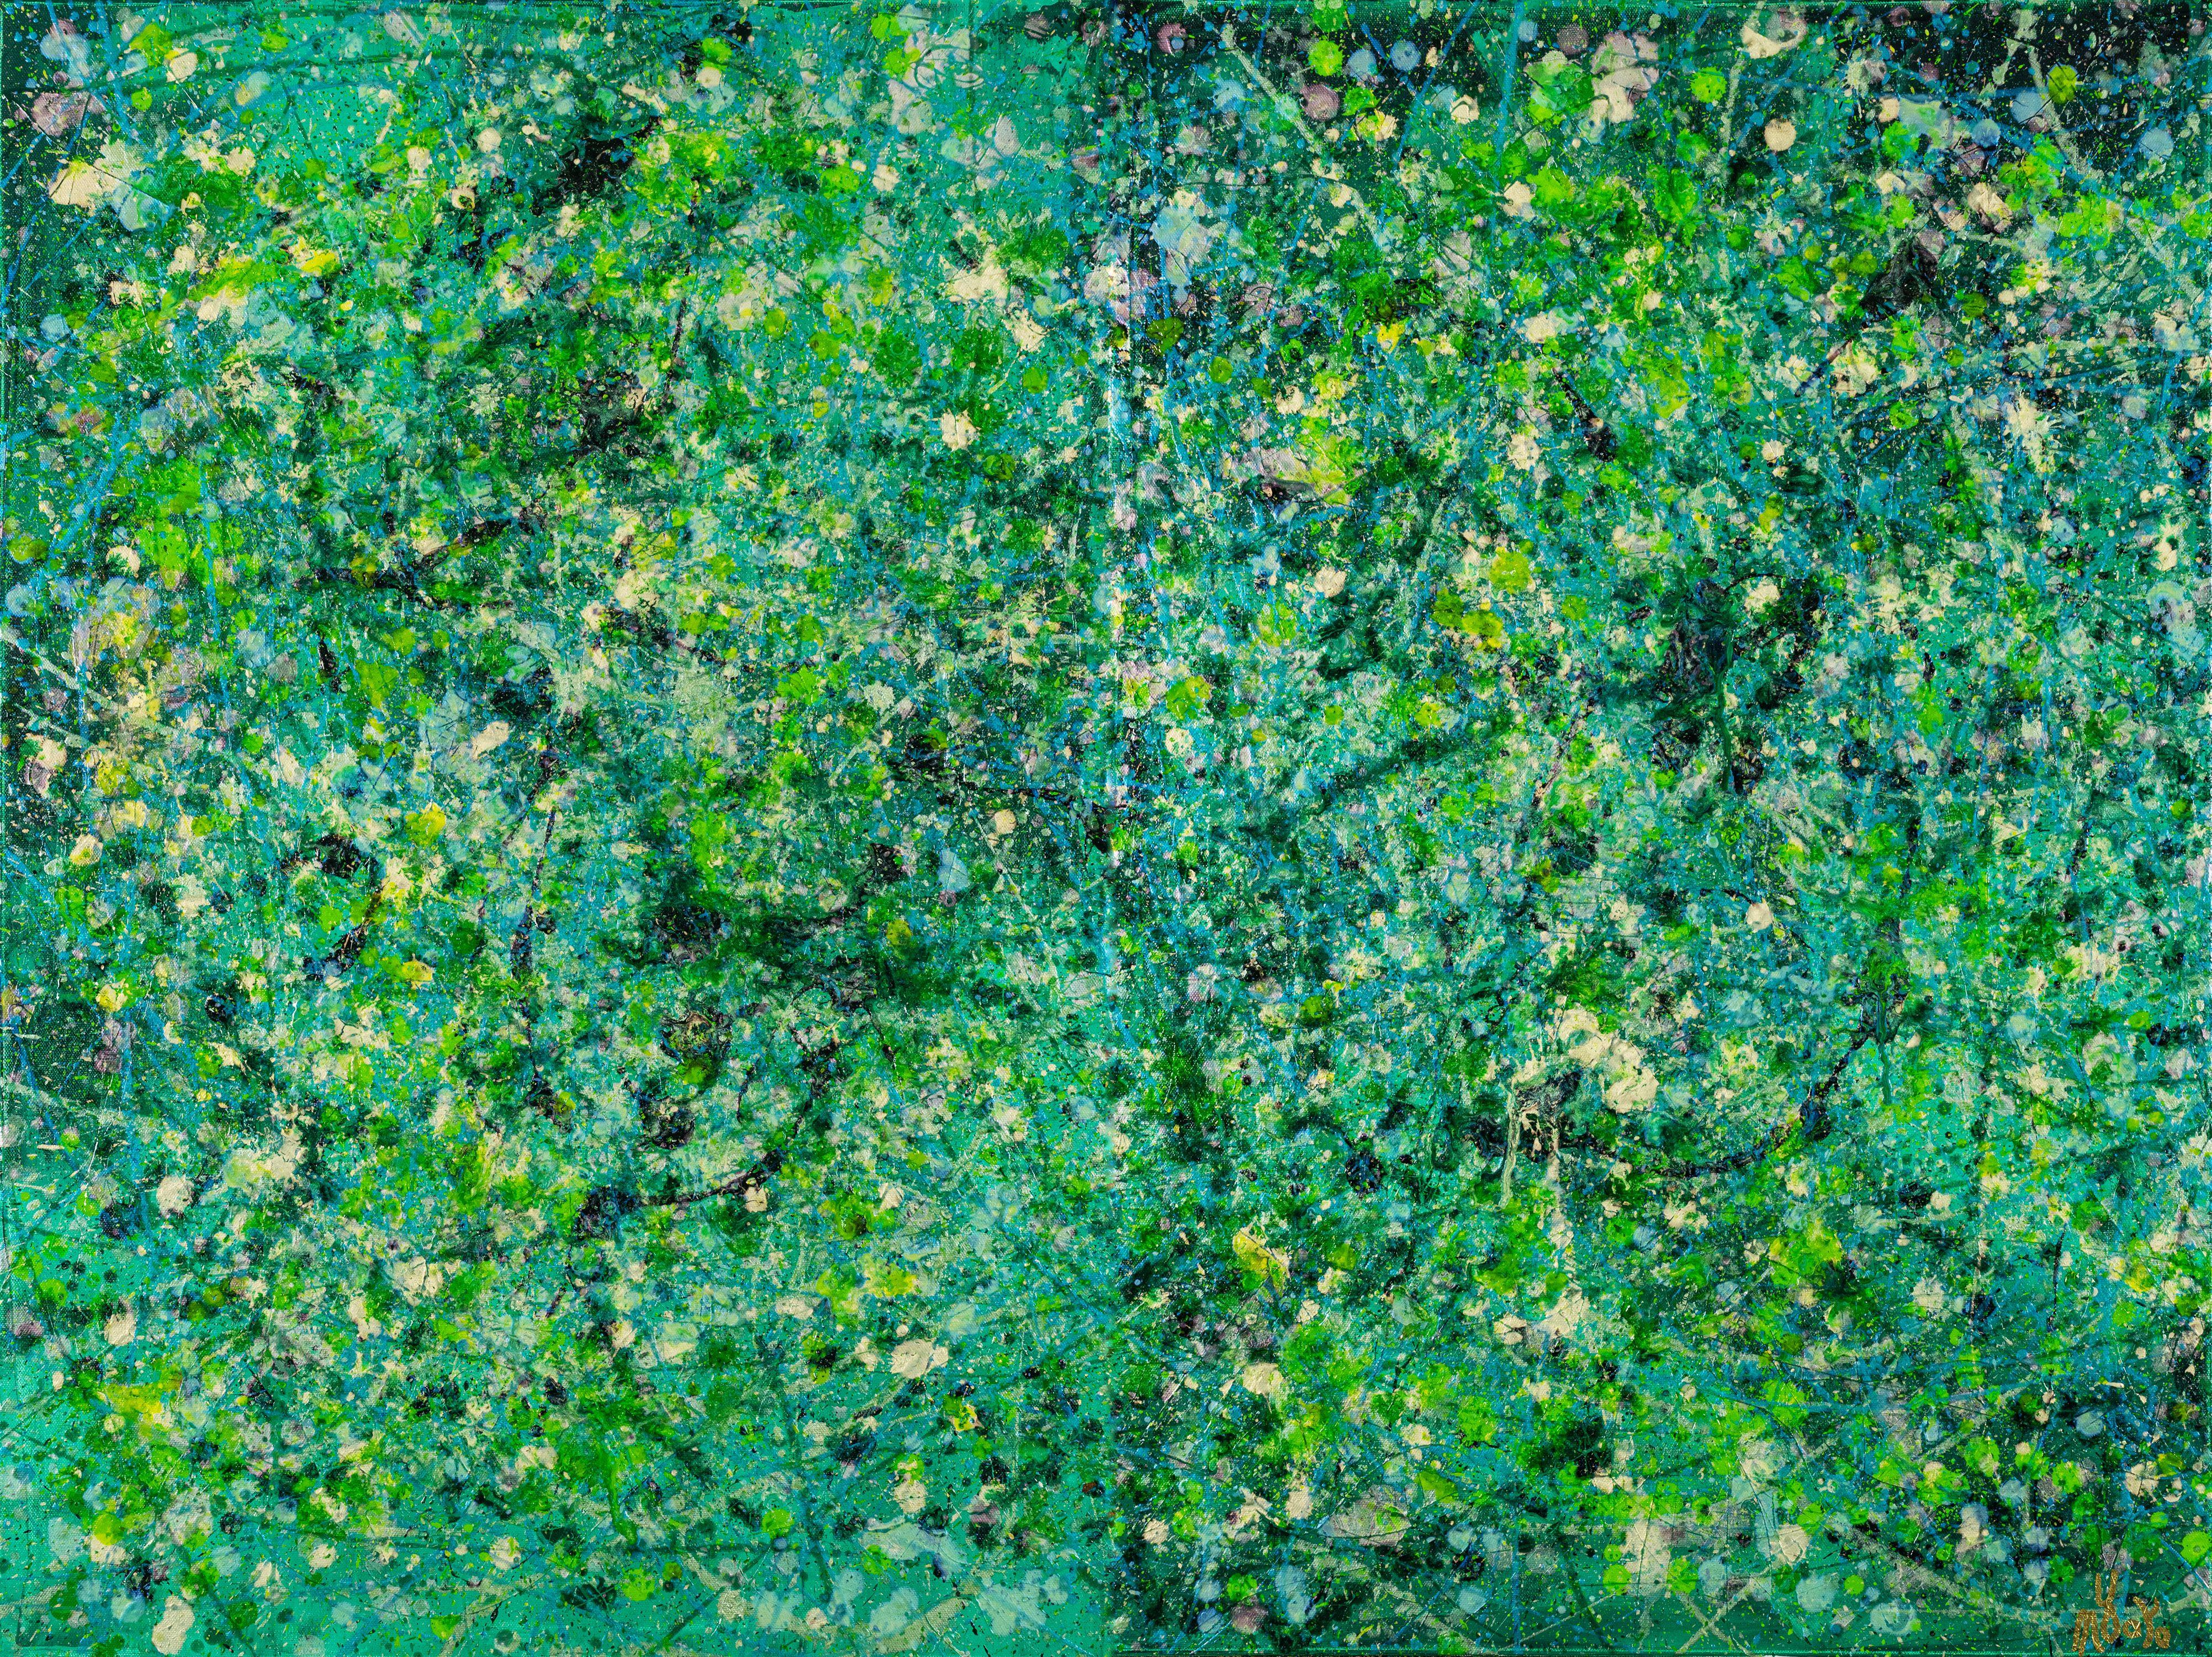 Multi canvas abstract    Expressionistic abstract painting with synchronized drizzles in shades of green, silver, yellow, pale iridescent orange over green background. Completed with gestural motion and energy. Signed on the front.    Two canvas 24W